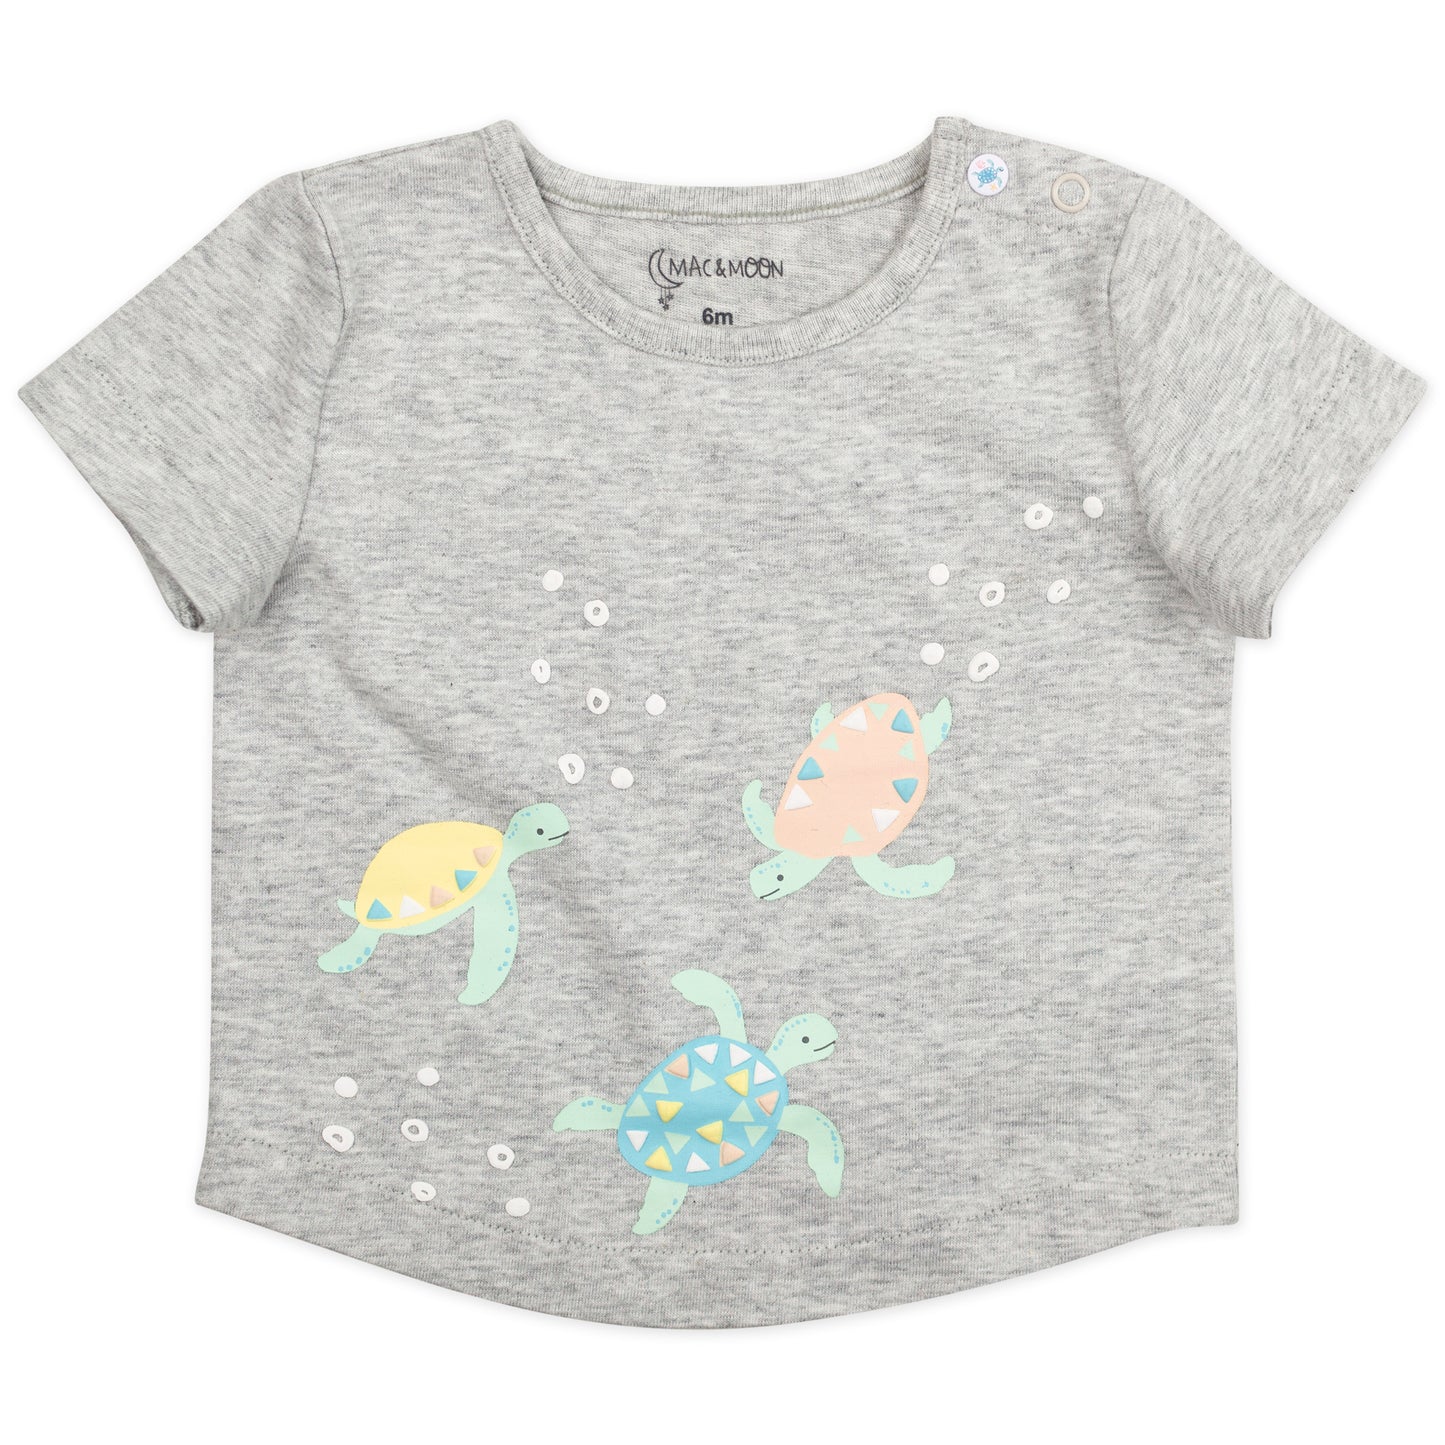 2-Pack Organic Cotton Tops in Turtle Print